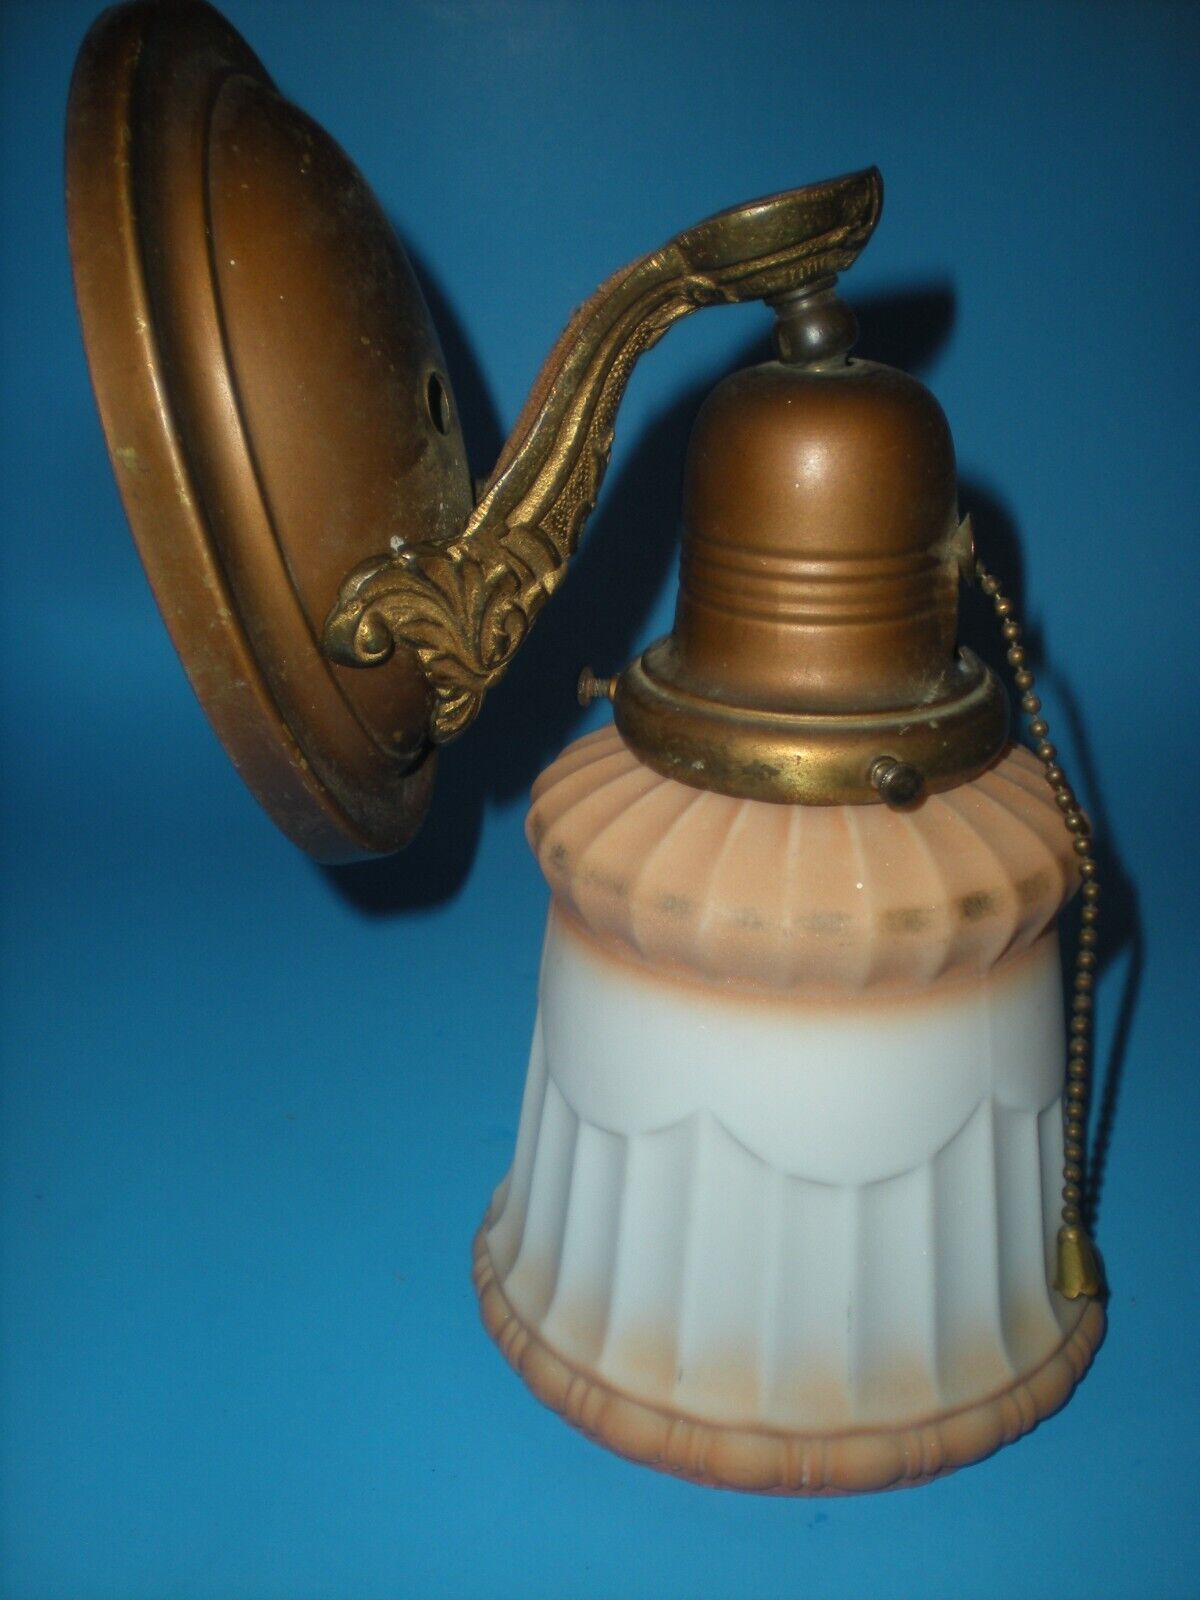 Antique Brass Wall Sconce Fixture With vtg Art Deco Polychrome Pleated Shade